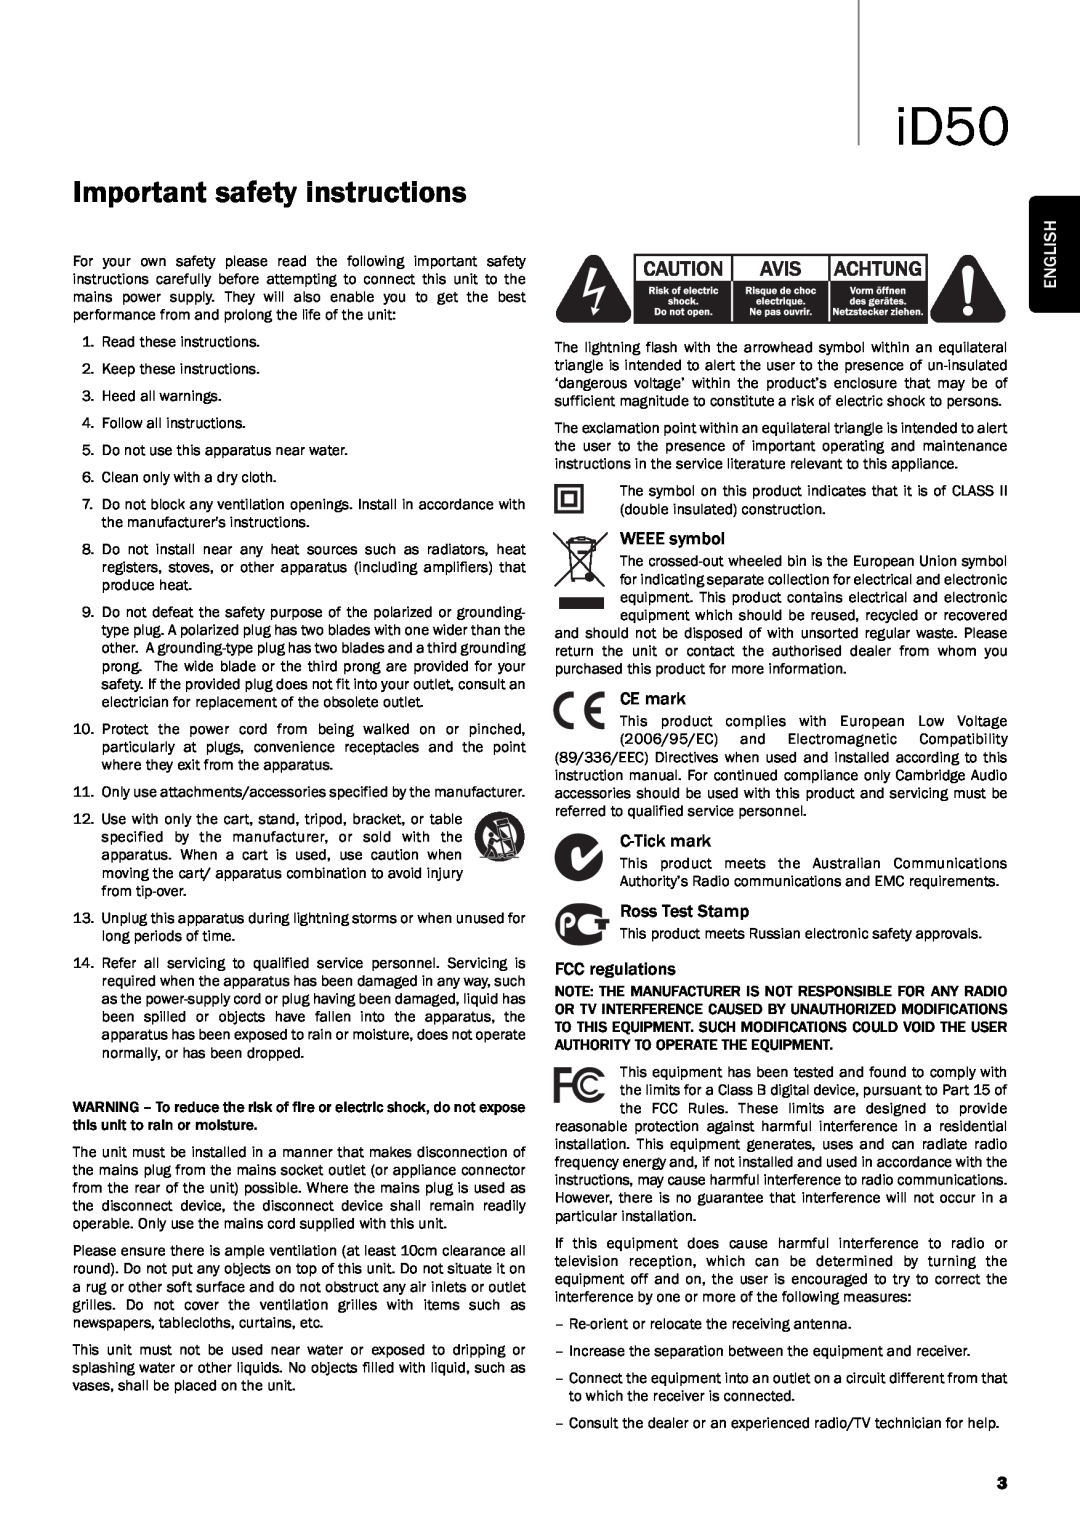 Cambridge Audio iD50 user manual Important safety instructions, English 